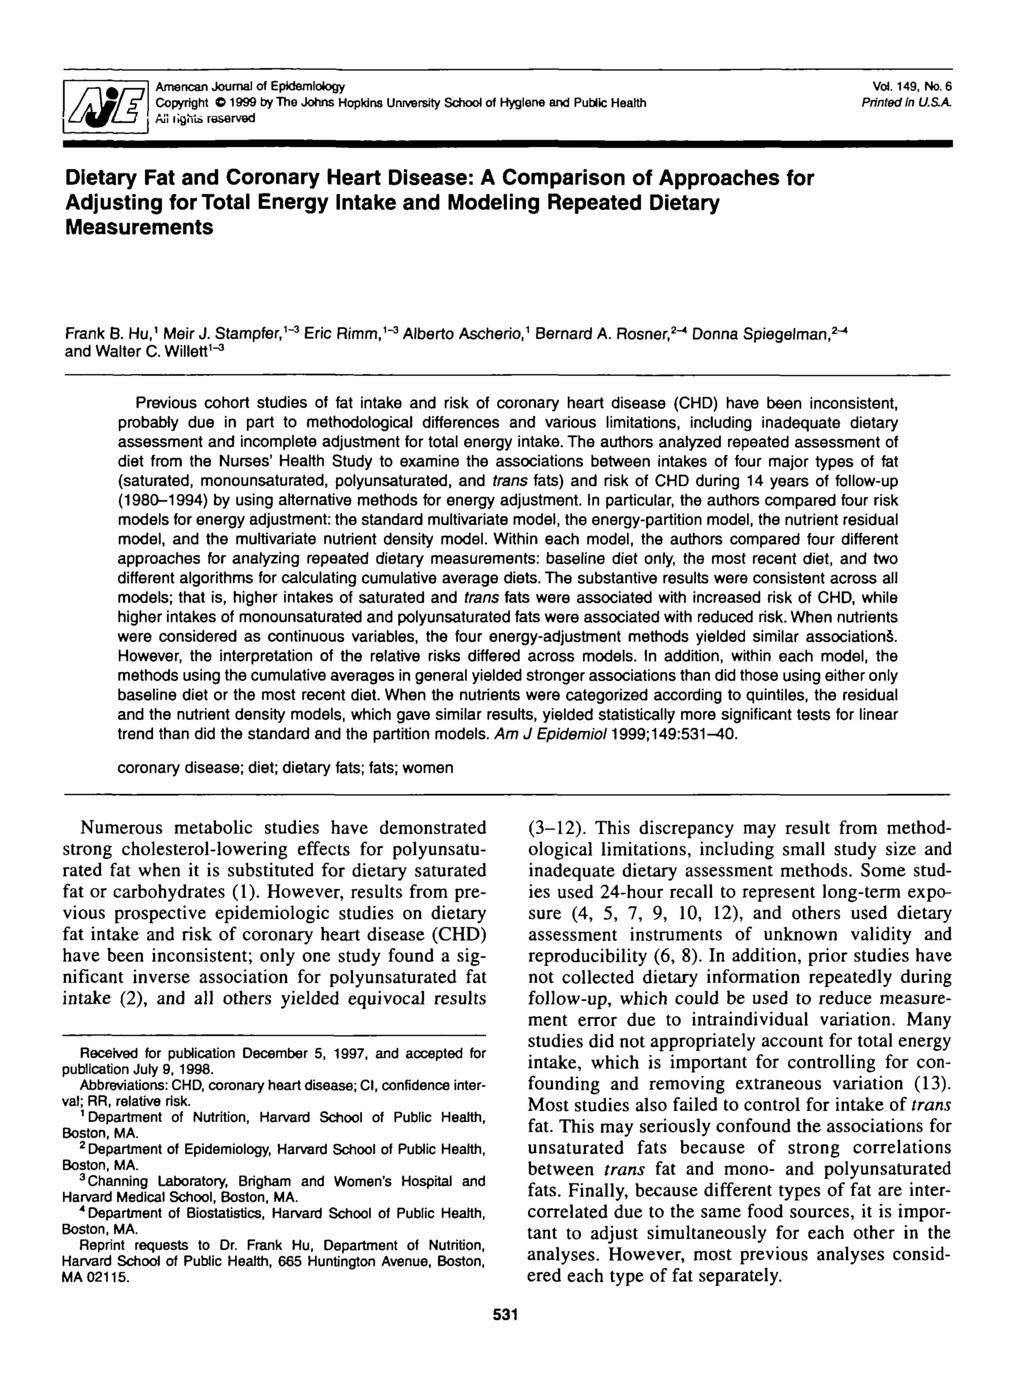 American Journal of Epidemiology Copyright 1999 by The Johns Hopkins University School of Hygiene and Public Health Aii ilgltis reserved Vol.149, No. 6 Printed In USA.